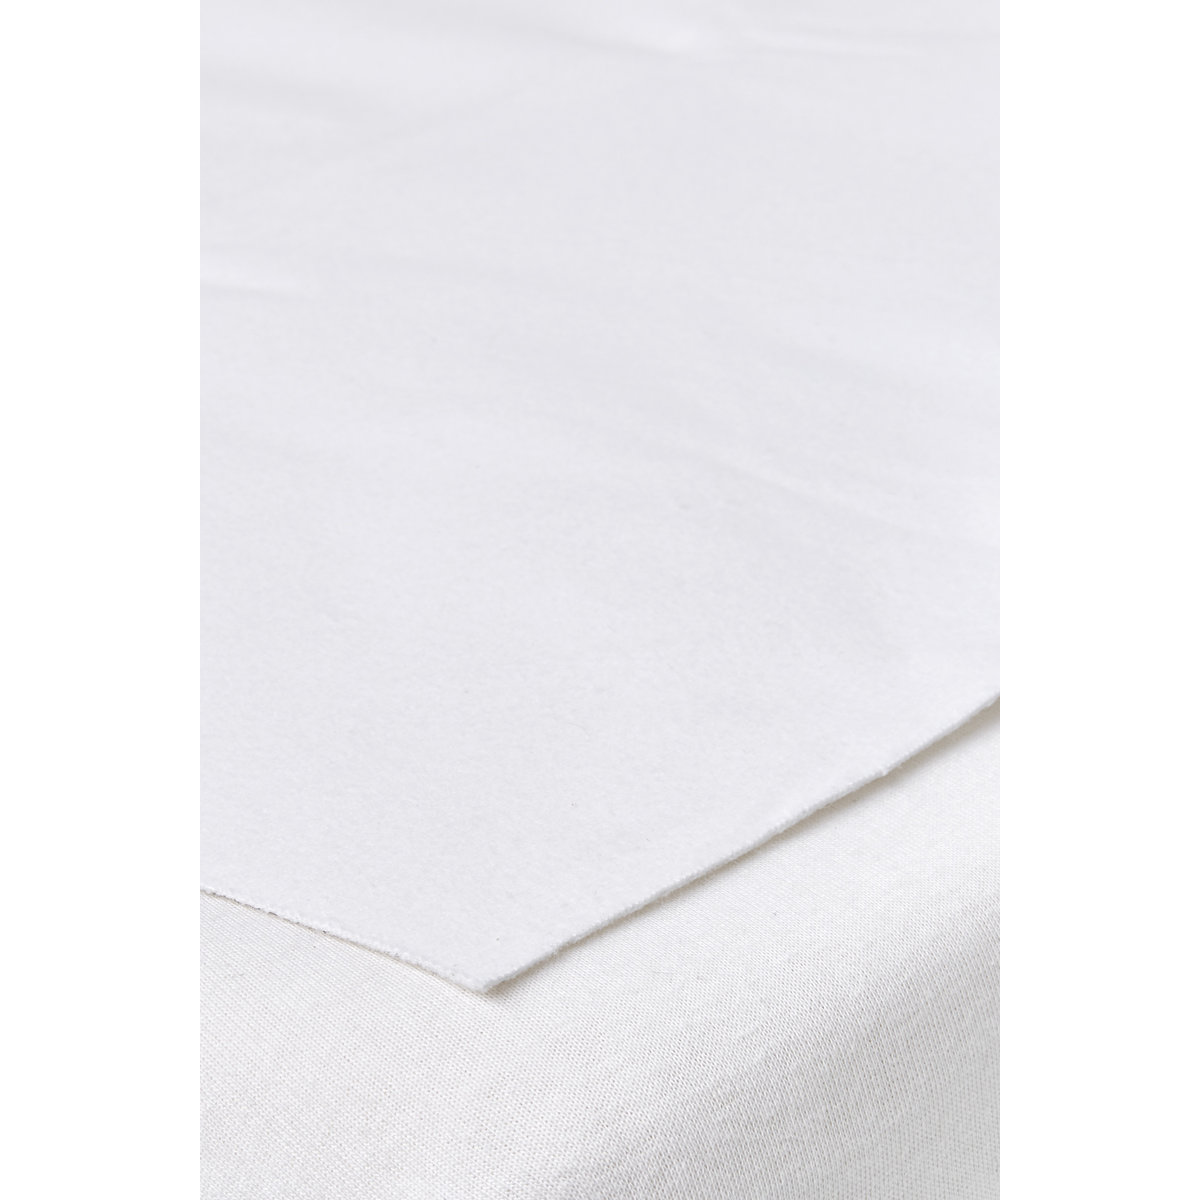 Meyco Molton Bed Cover - 40x50